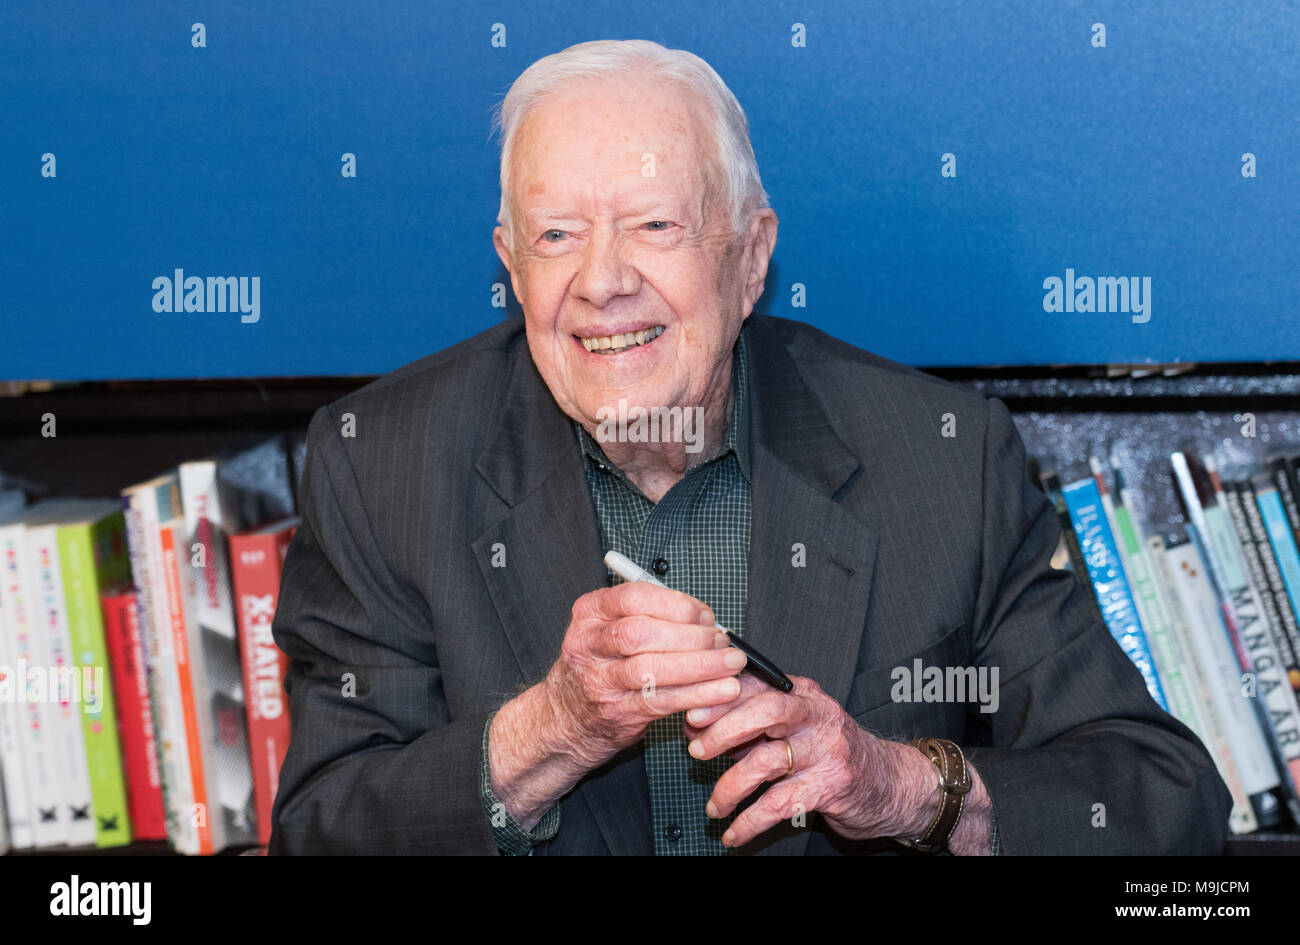 Former US President Jimmy Carter at a book signing for his new book "Faith: A Journey For All" at the Barnes & Noble bookstore on Fifth Avenue in midtown Manhattan in New York City. Stock Photo